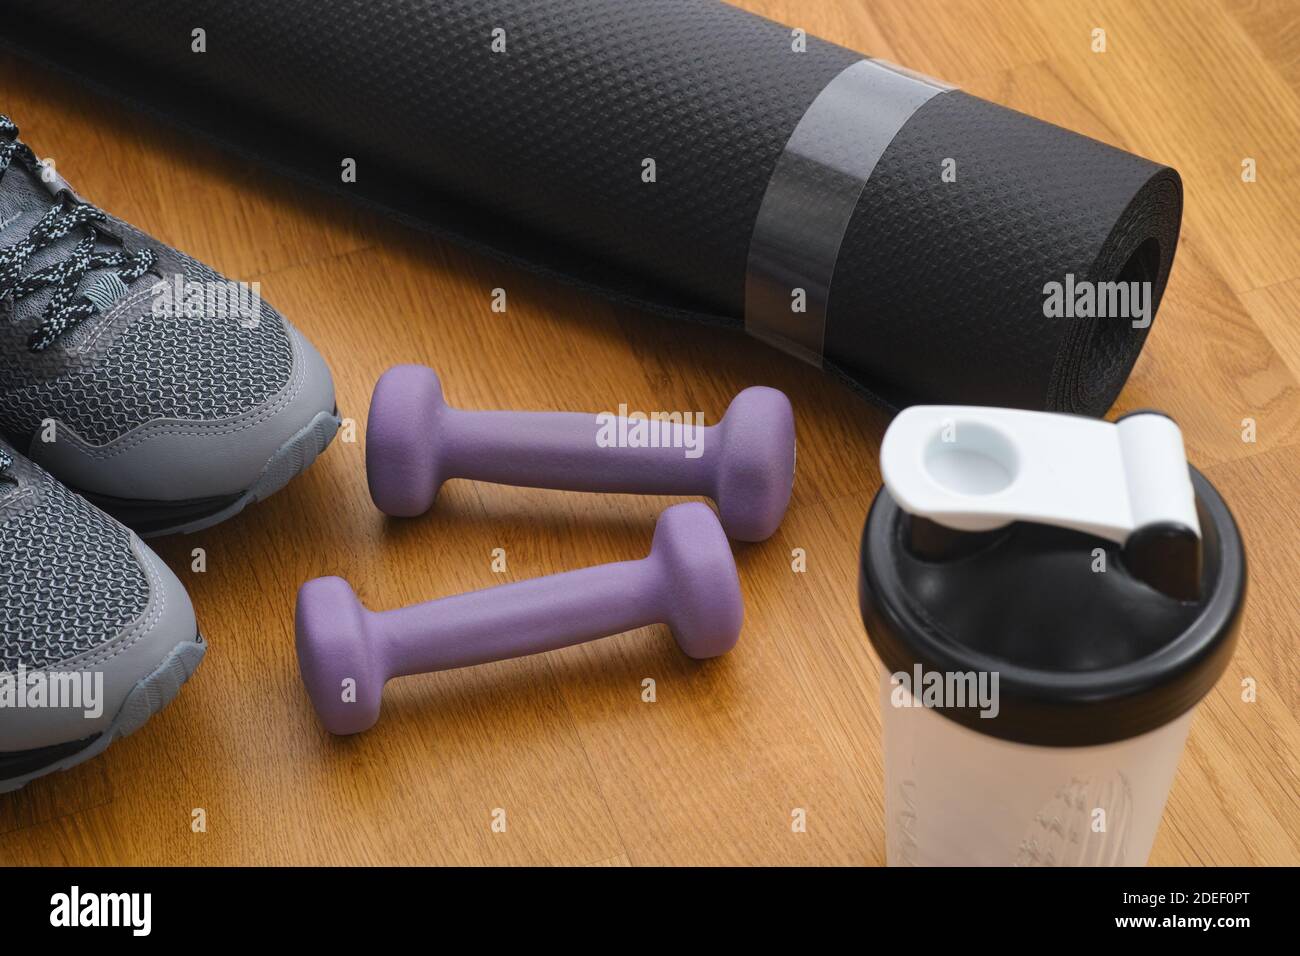 Protein shaker, dumbbells, sport shoes and exercise mat on the floor. Close up. Stock Photo